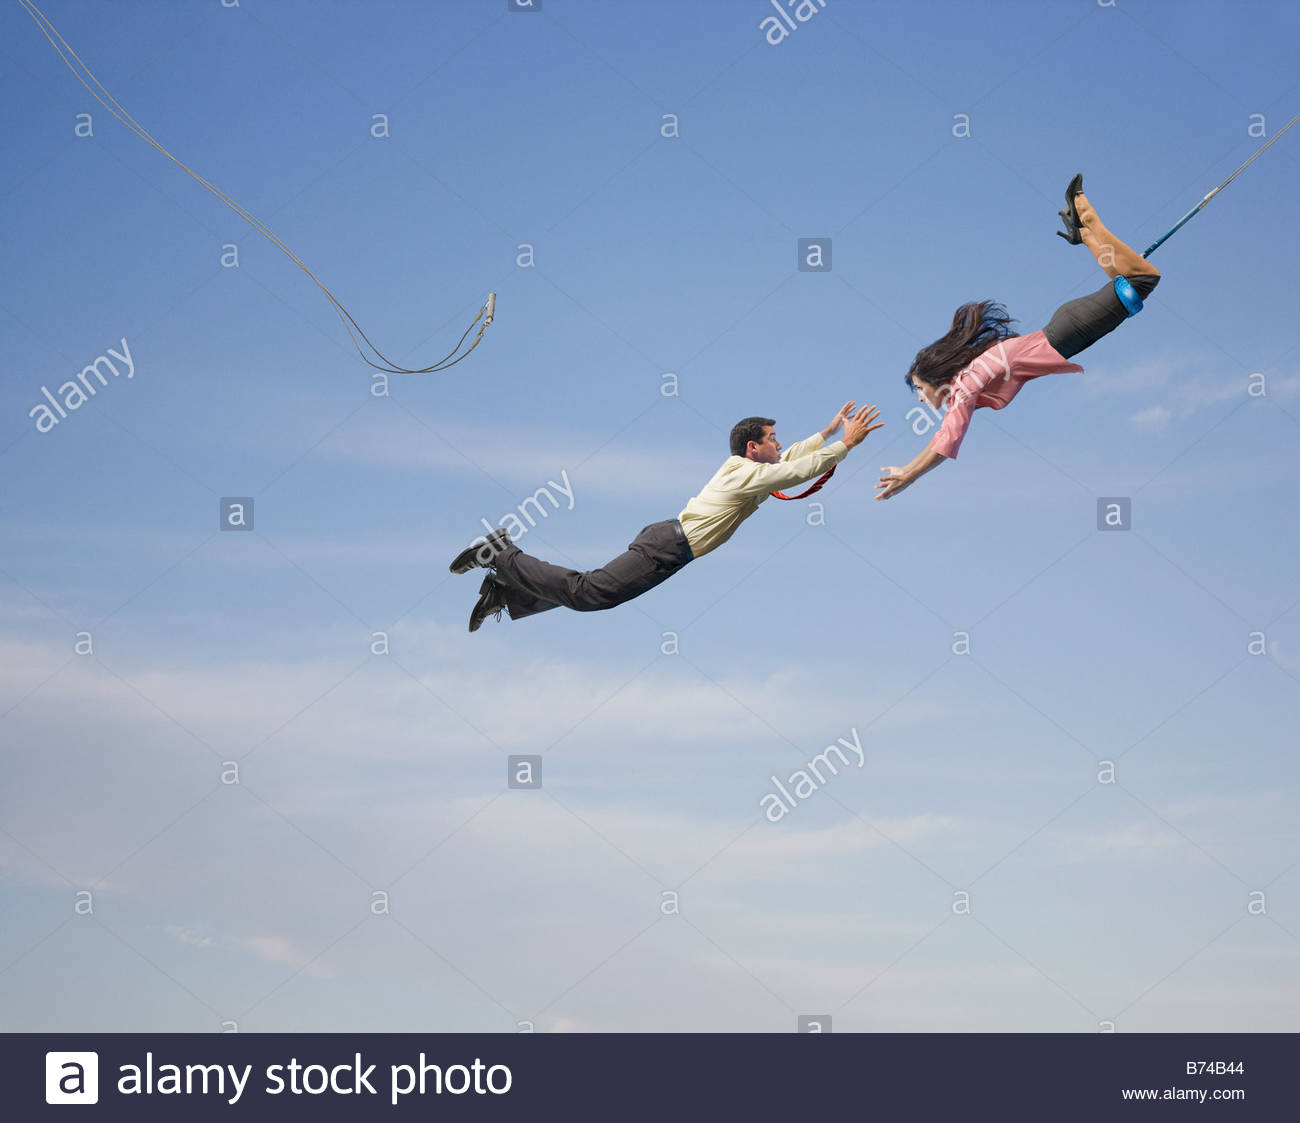 Business_people_on_flying_trapeze-B74B44